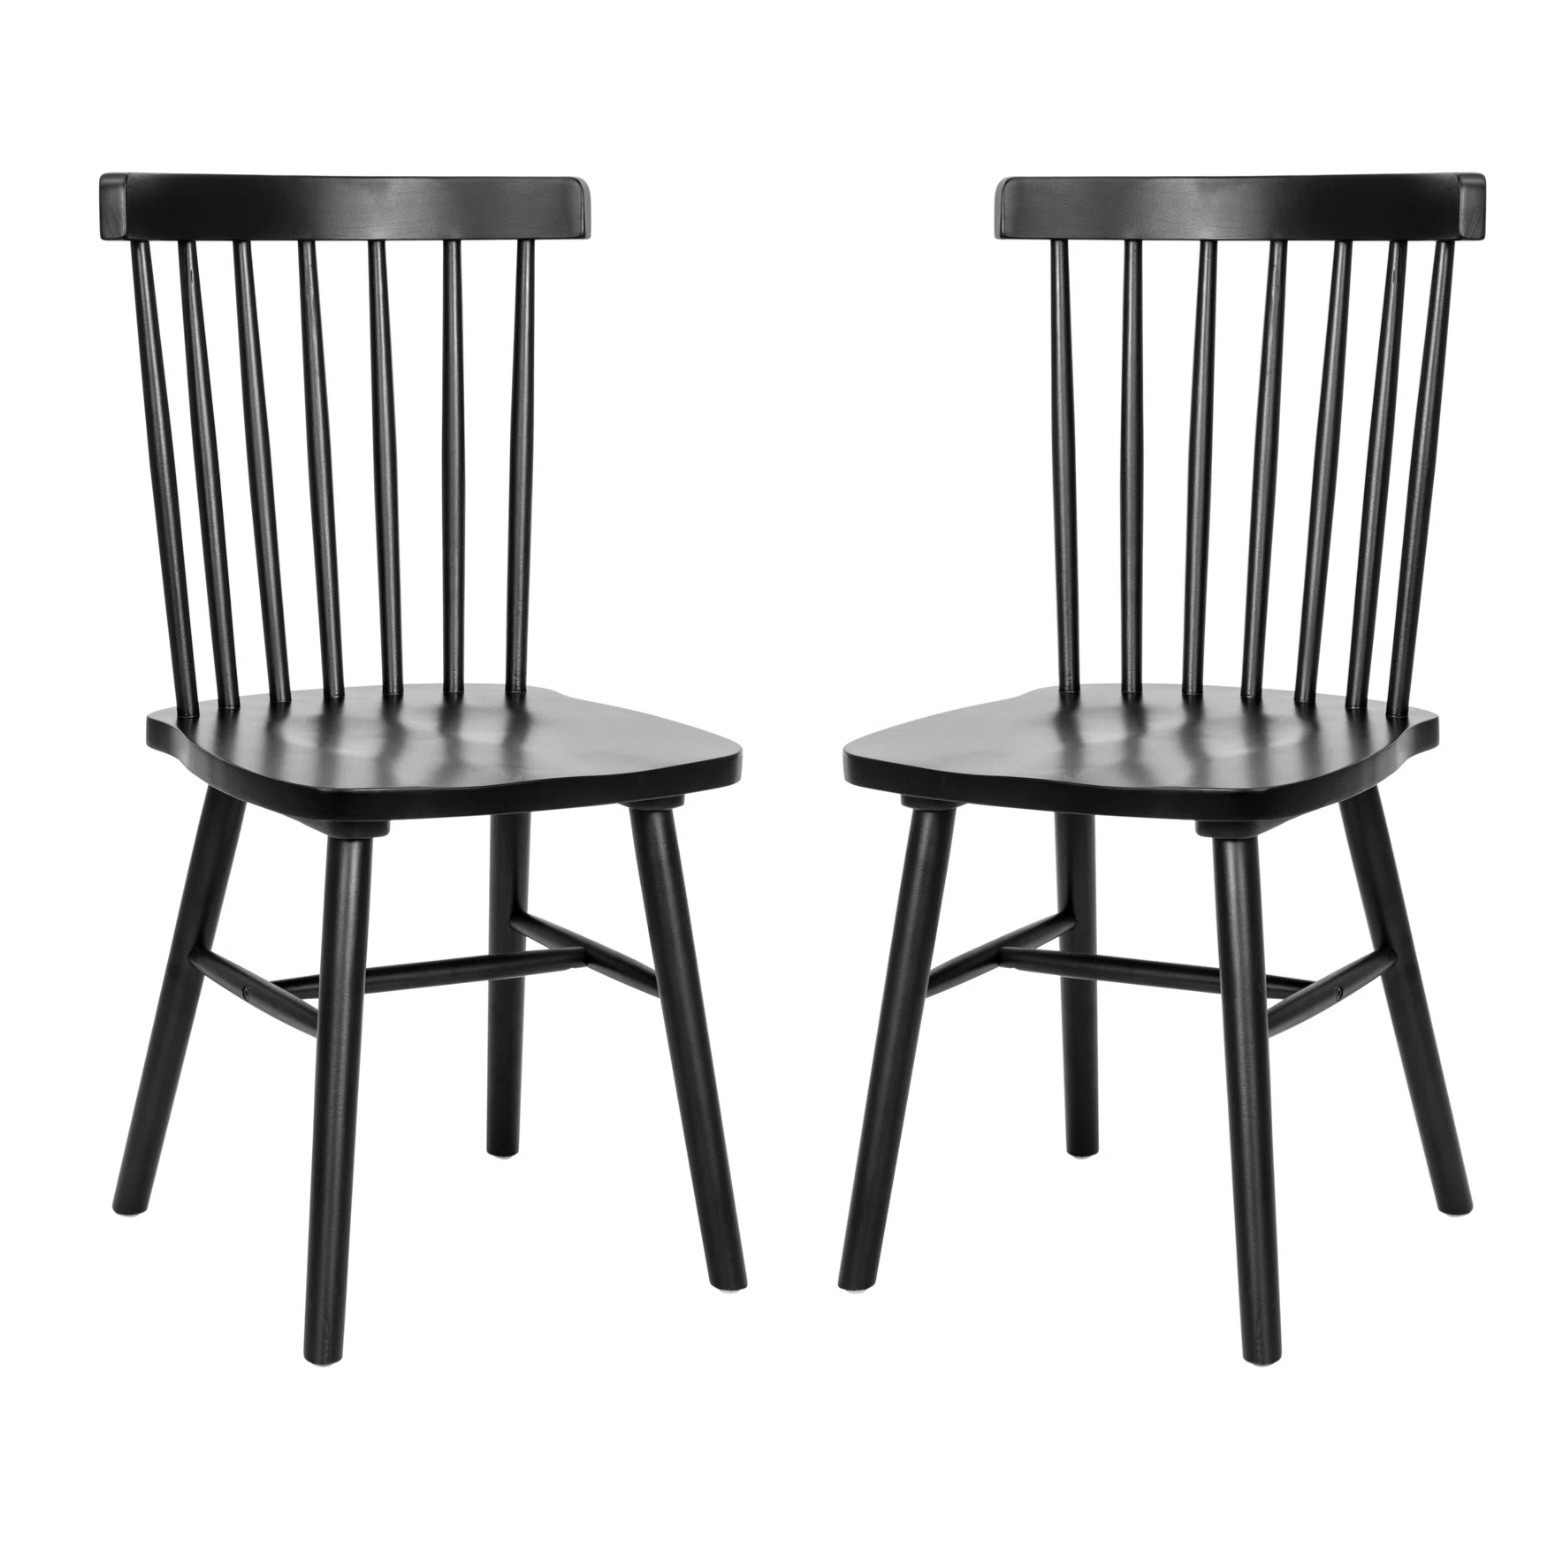 Rubberwood Dining Chair w/ Slatted Back, Black, 16.5 x 19 x 36 Furniture Available for Local Delivery or Pick Up